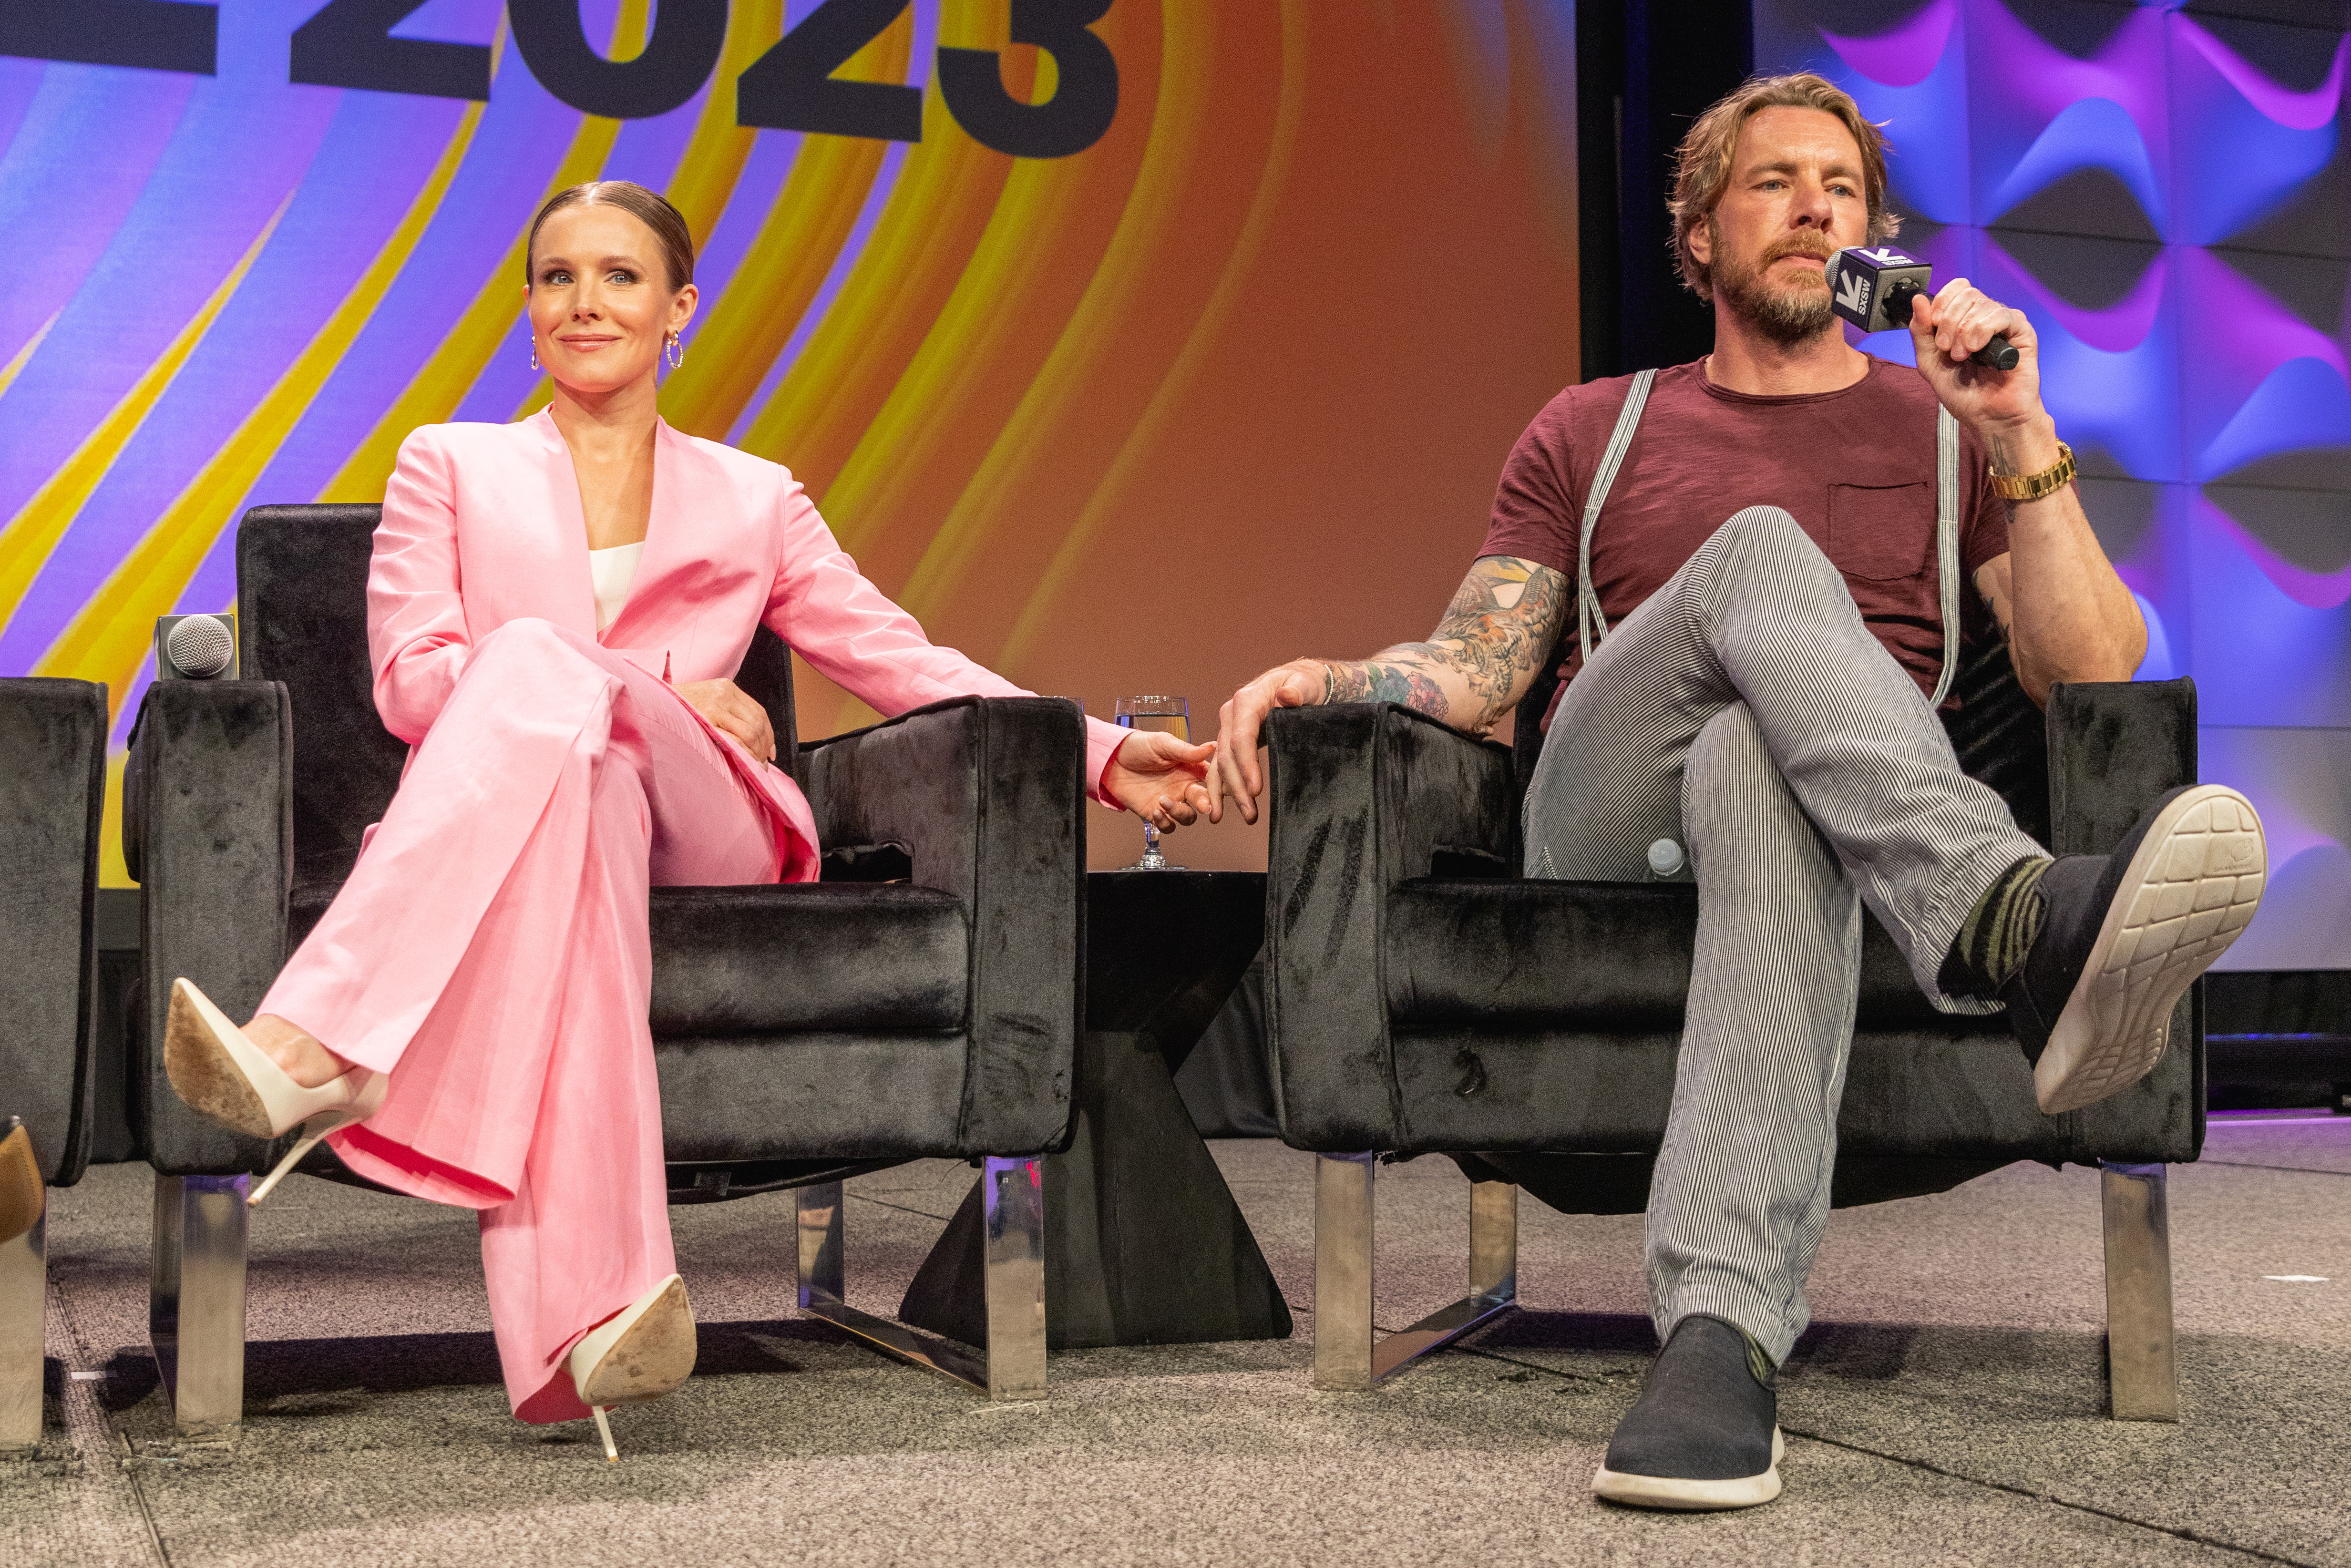 Kristen Bell and Dax Shepard speaking onstage at the SXSW Conference and Festival in Austin, Texas on March 14, 2023 | Source: Getty Images